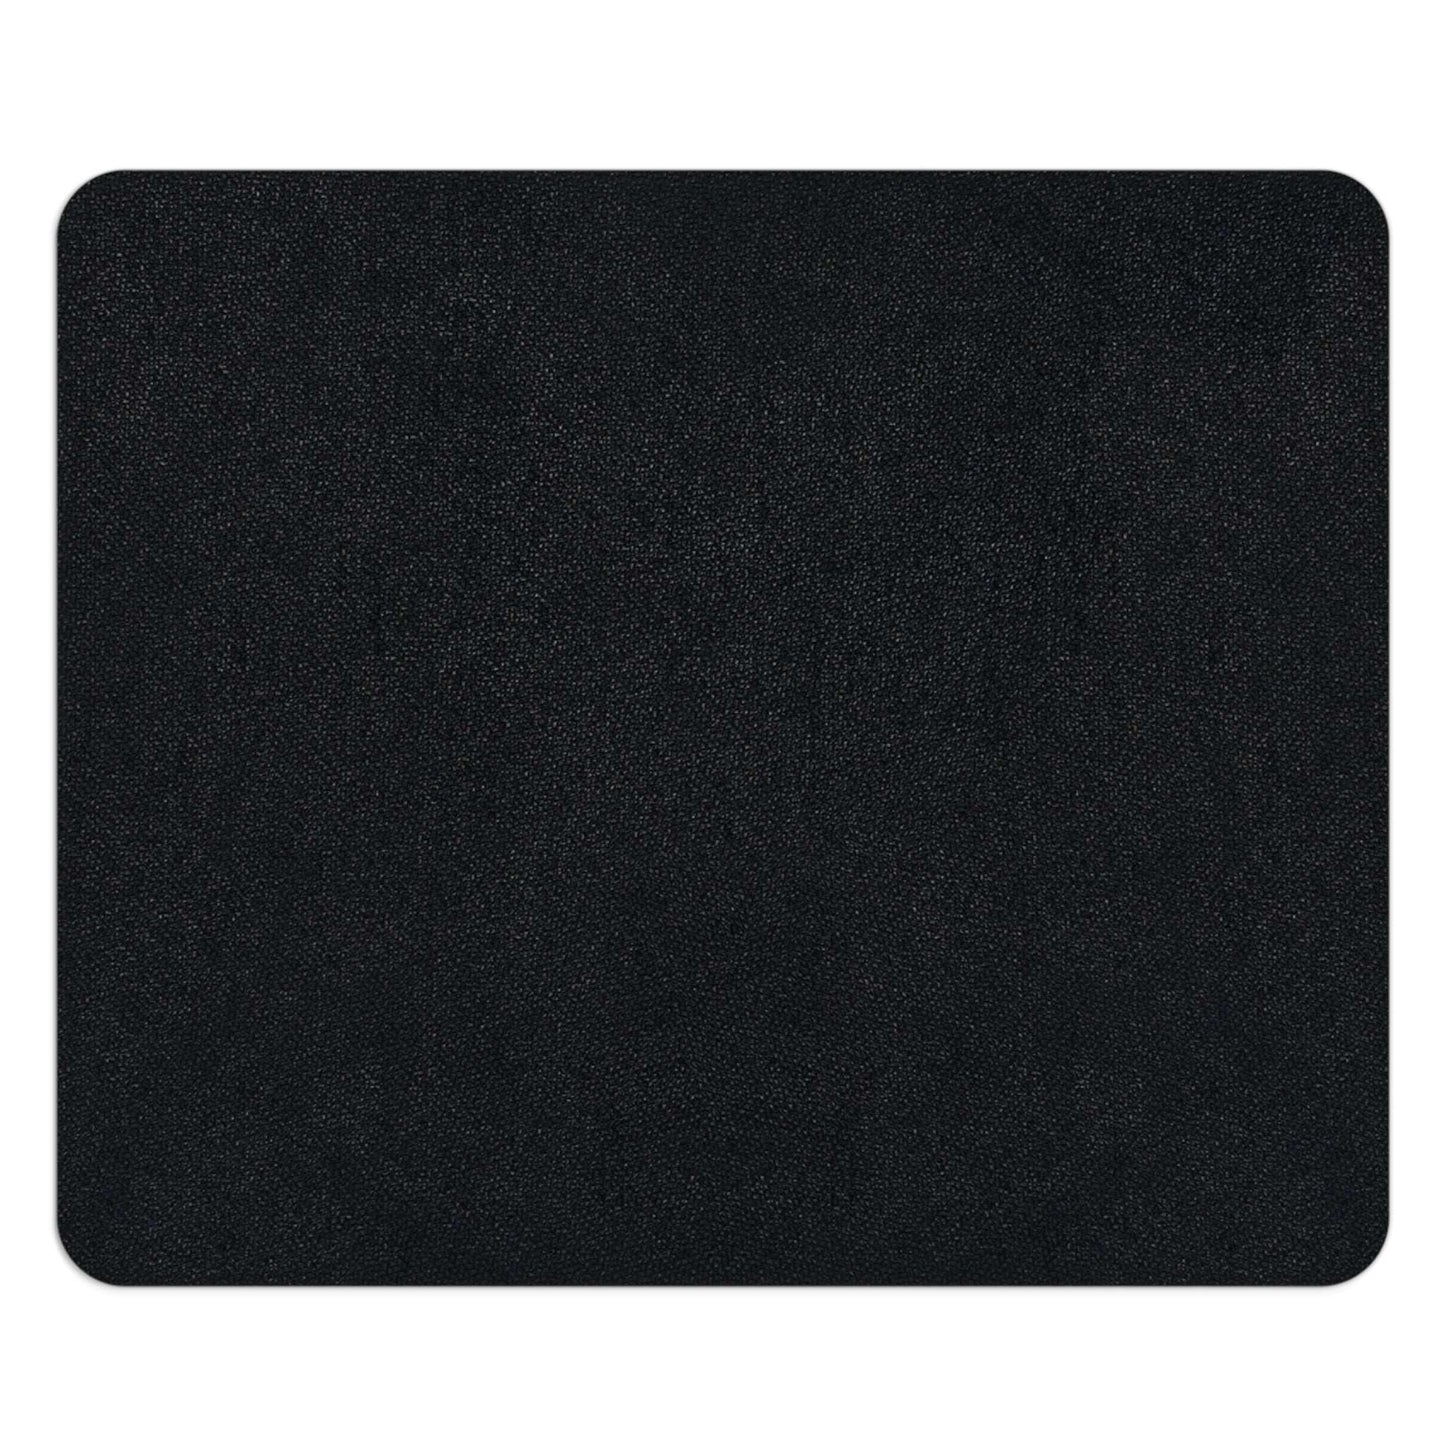 Computer Mouse Pad, Non-slip rubber bottom, Wildflowers